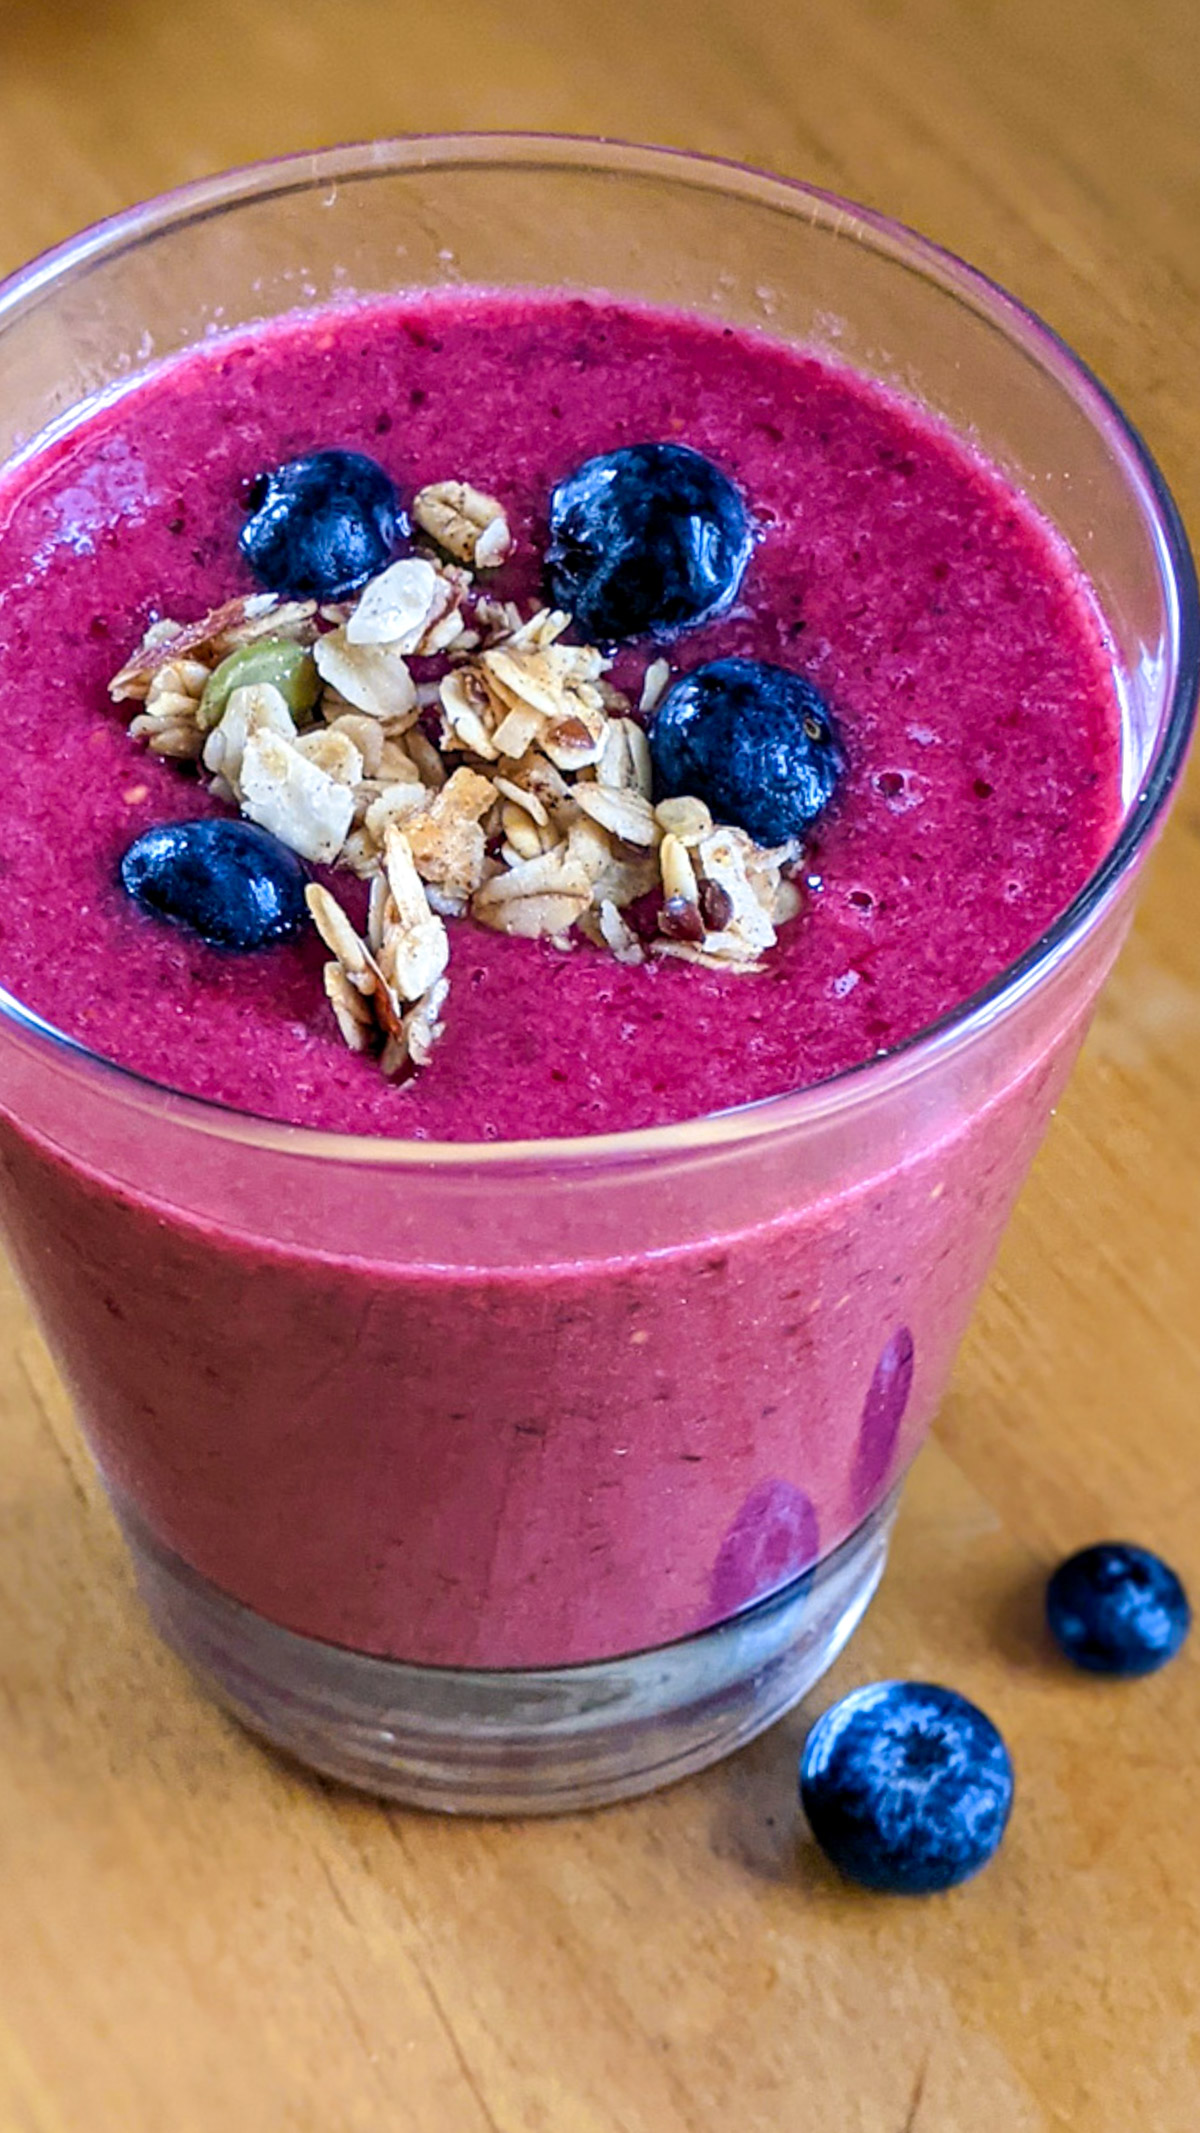 Bright pink berry smoothie with blueberry and granola topping.